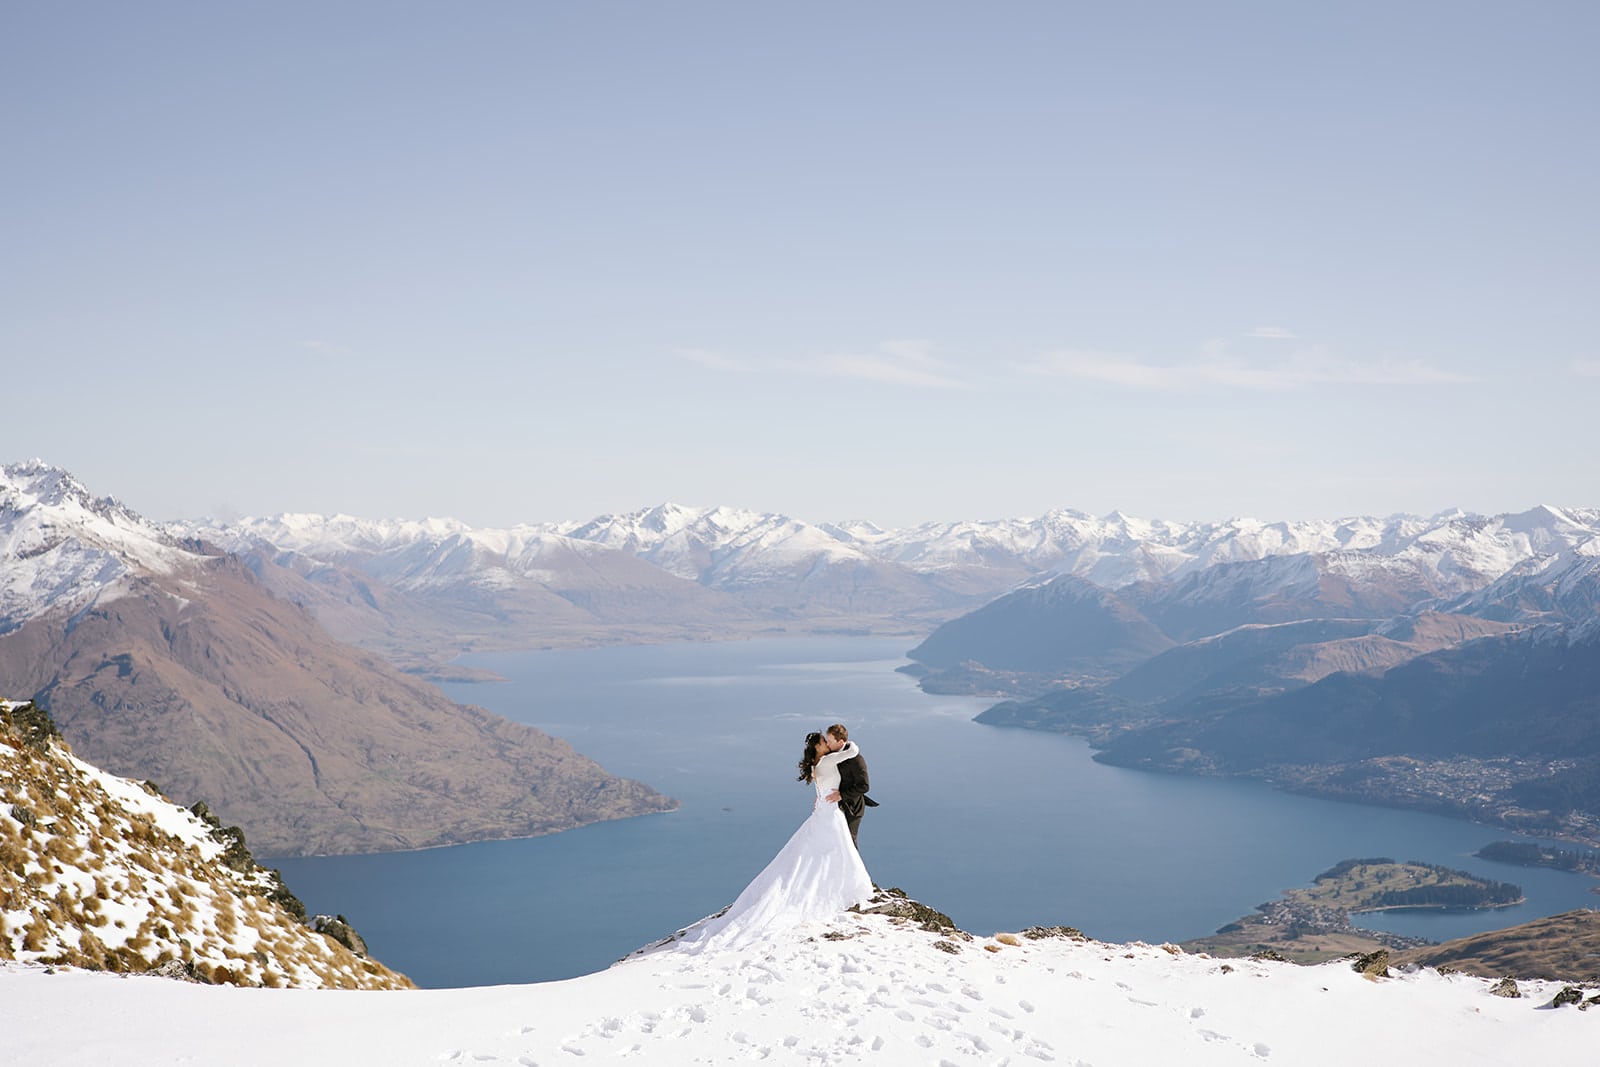 Queenstown New Zealand Elopement Wedding Photographer - A bride and groom, captured by a Queenstown Wedding Videographer on the Remarkables, standing on top of a snowy mountain overlooking lake wanaka.